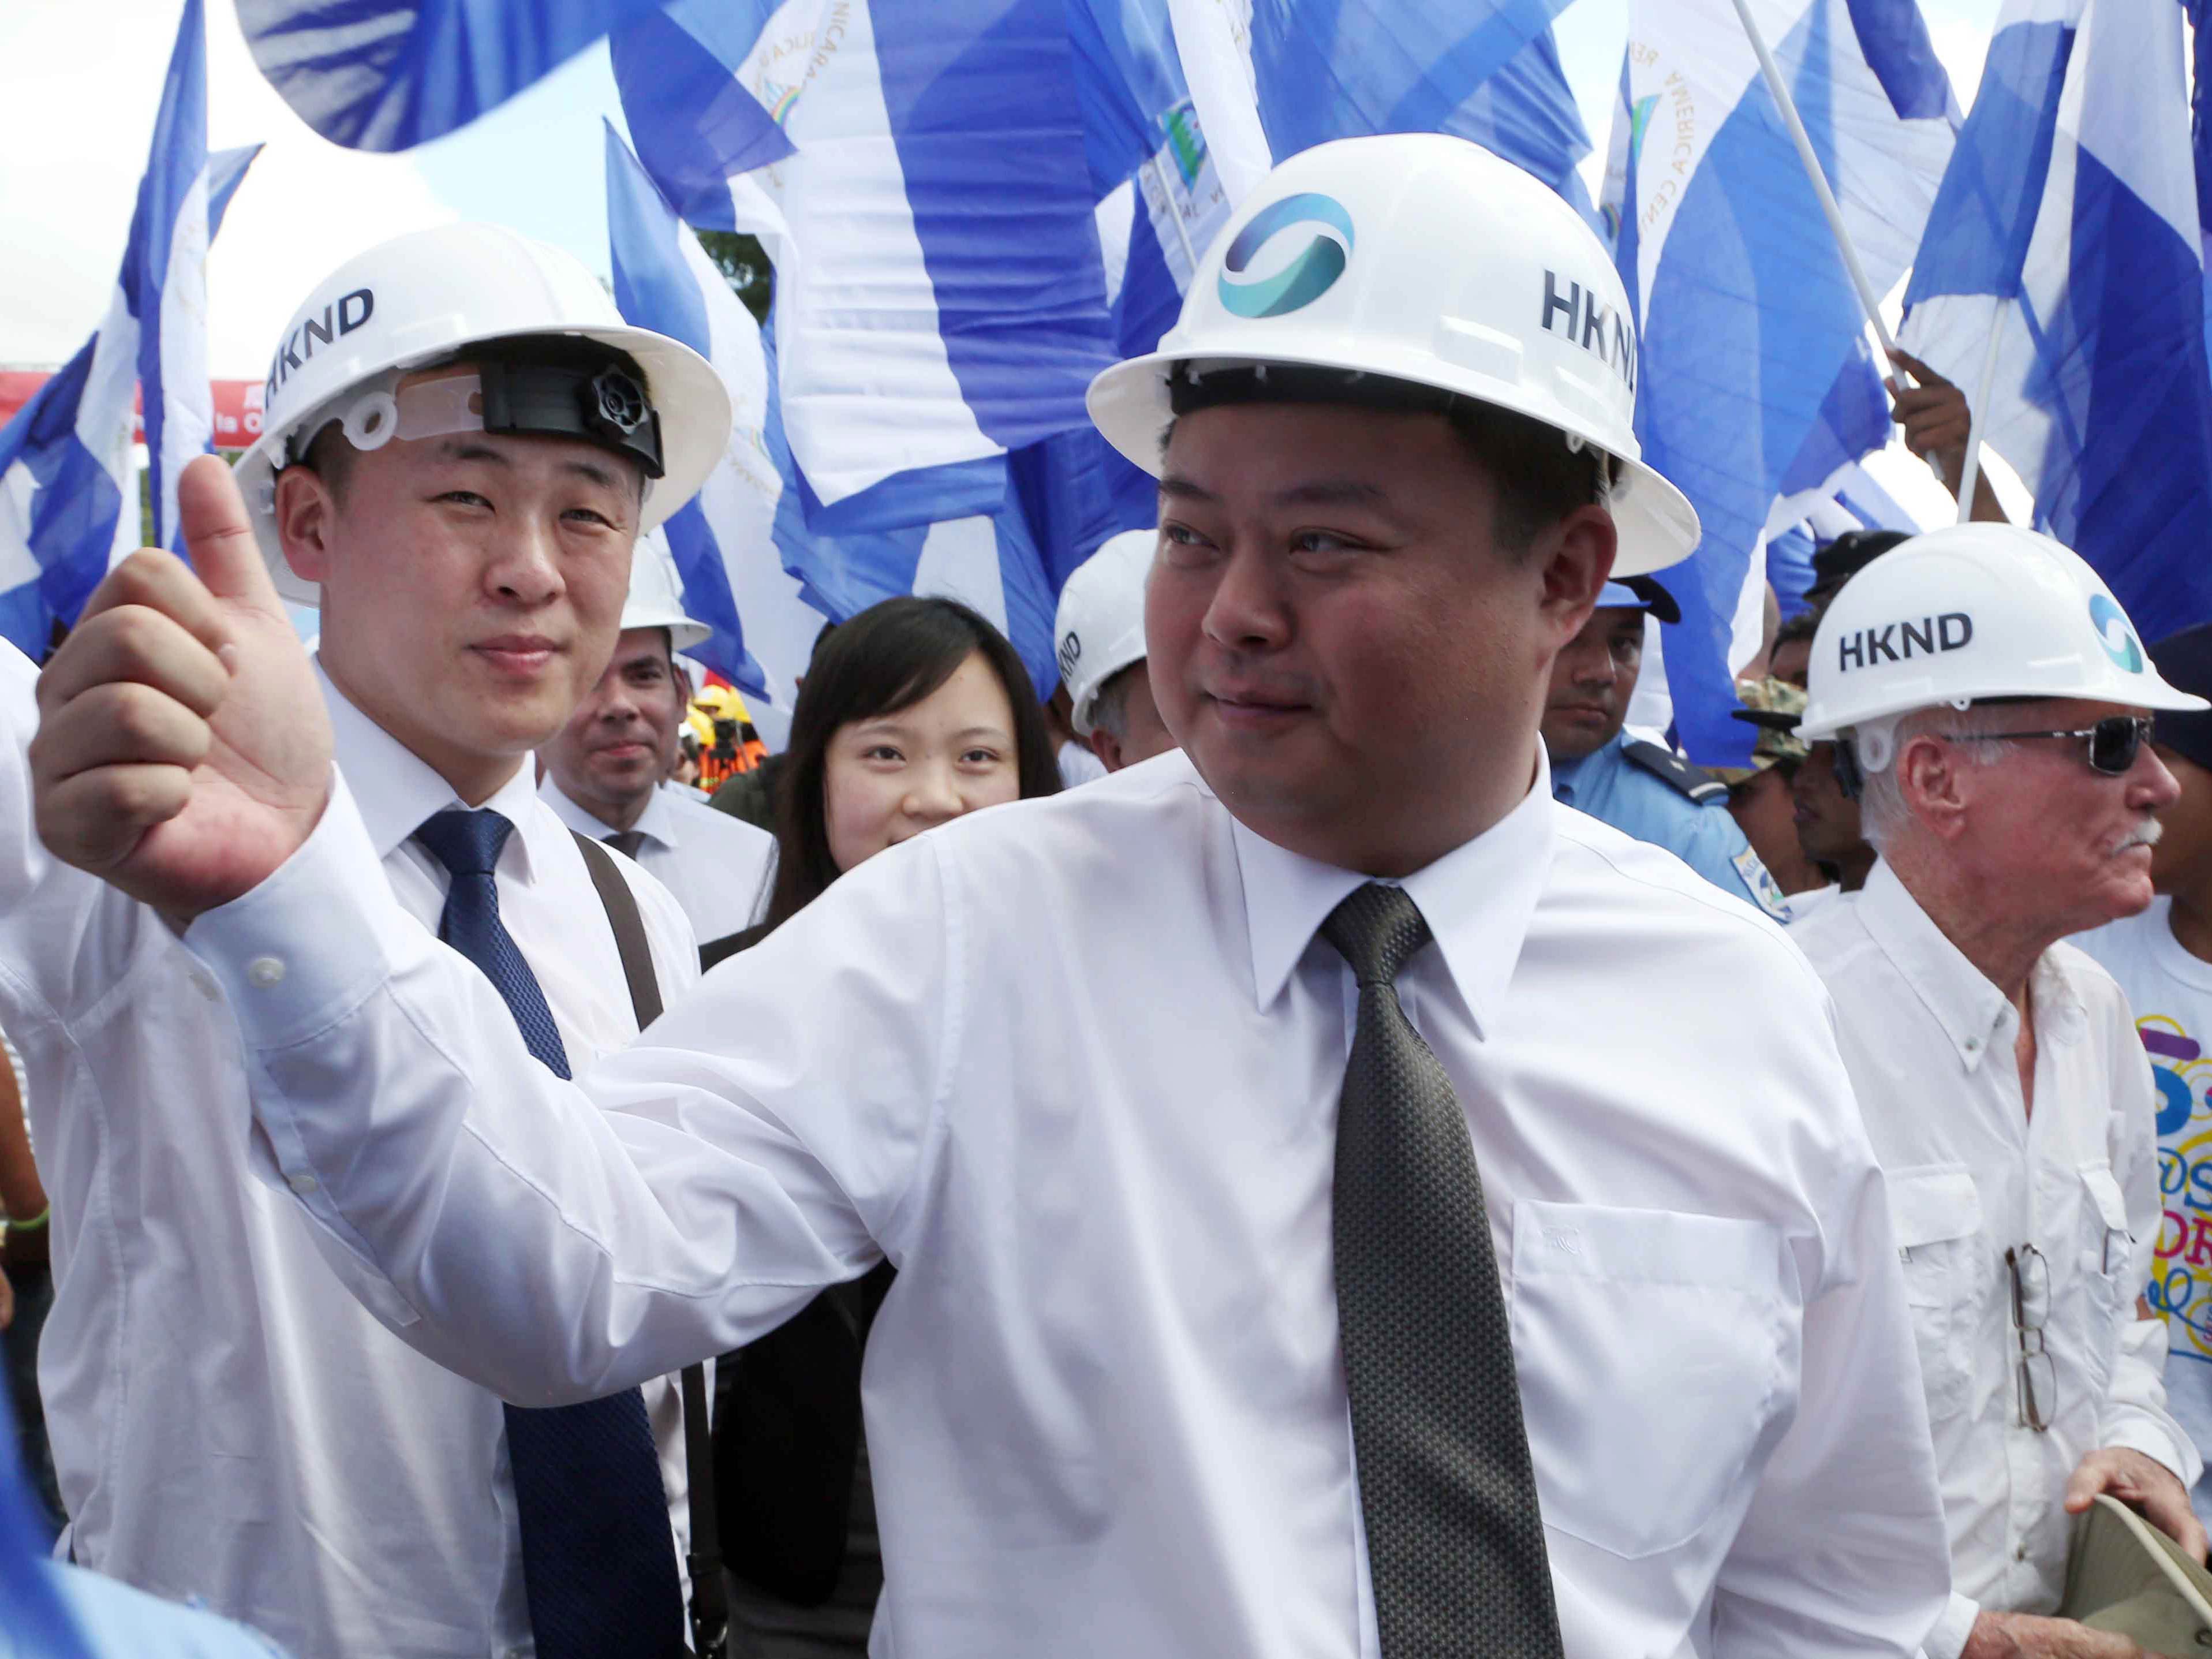 Wang Jing of HKND Group gives a thumbs up at the inauguration of the construction of an inter-oceanic canal in Tola, Nicaragua, on Dec. 22, 2014.&nbsp;